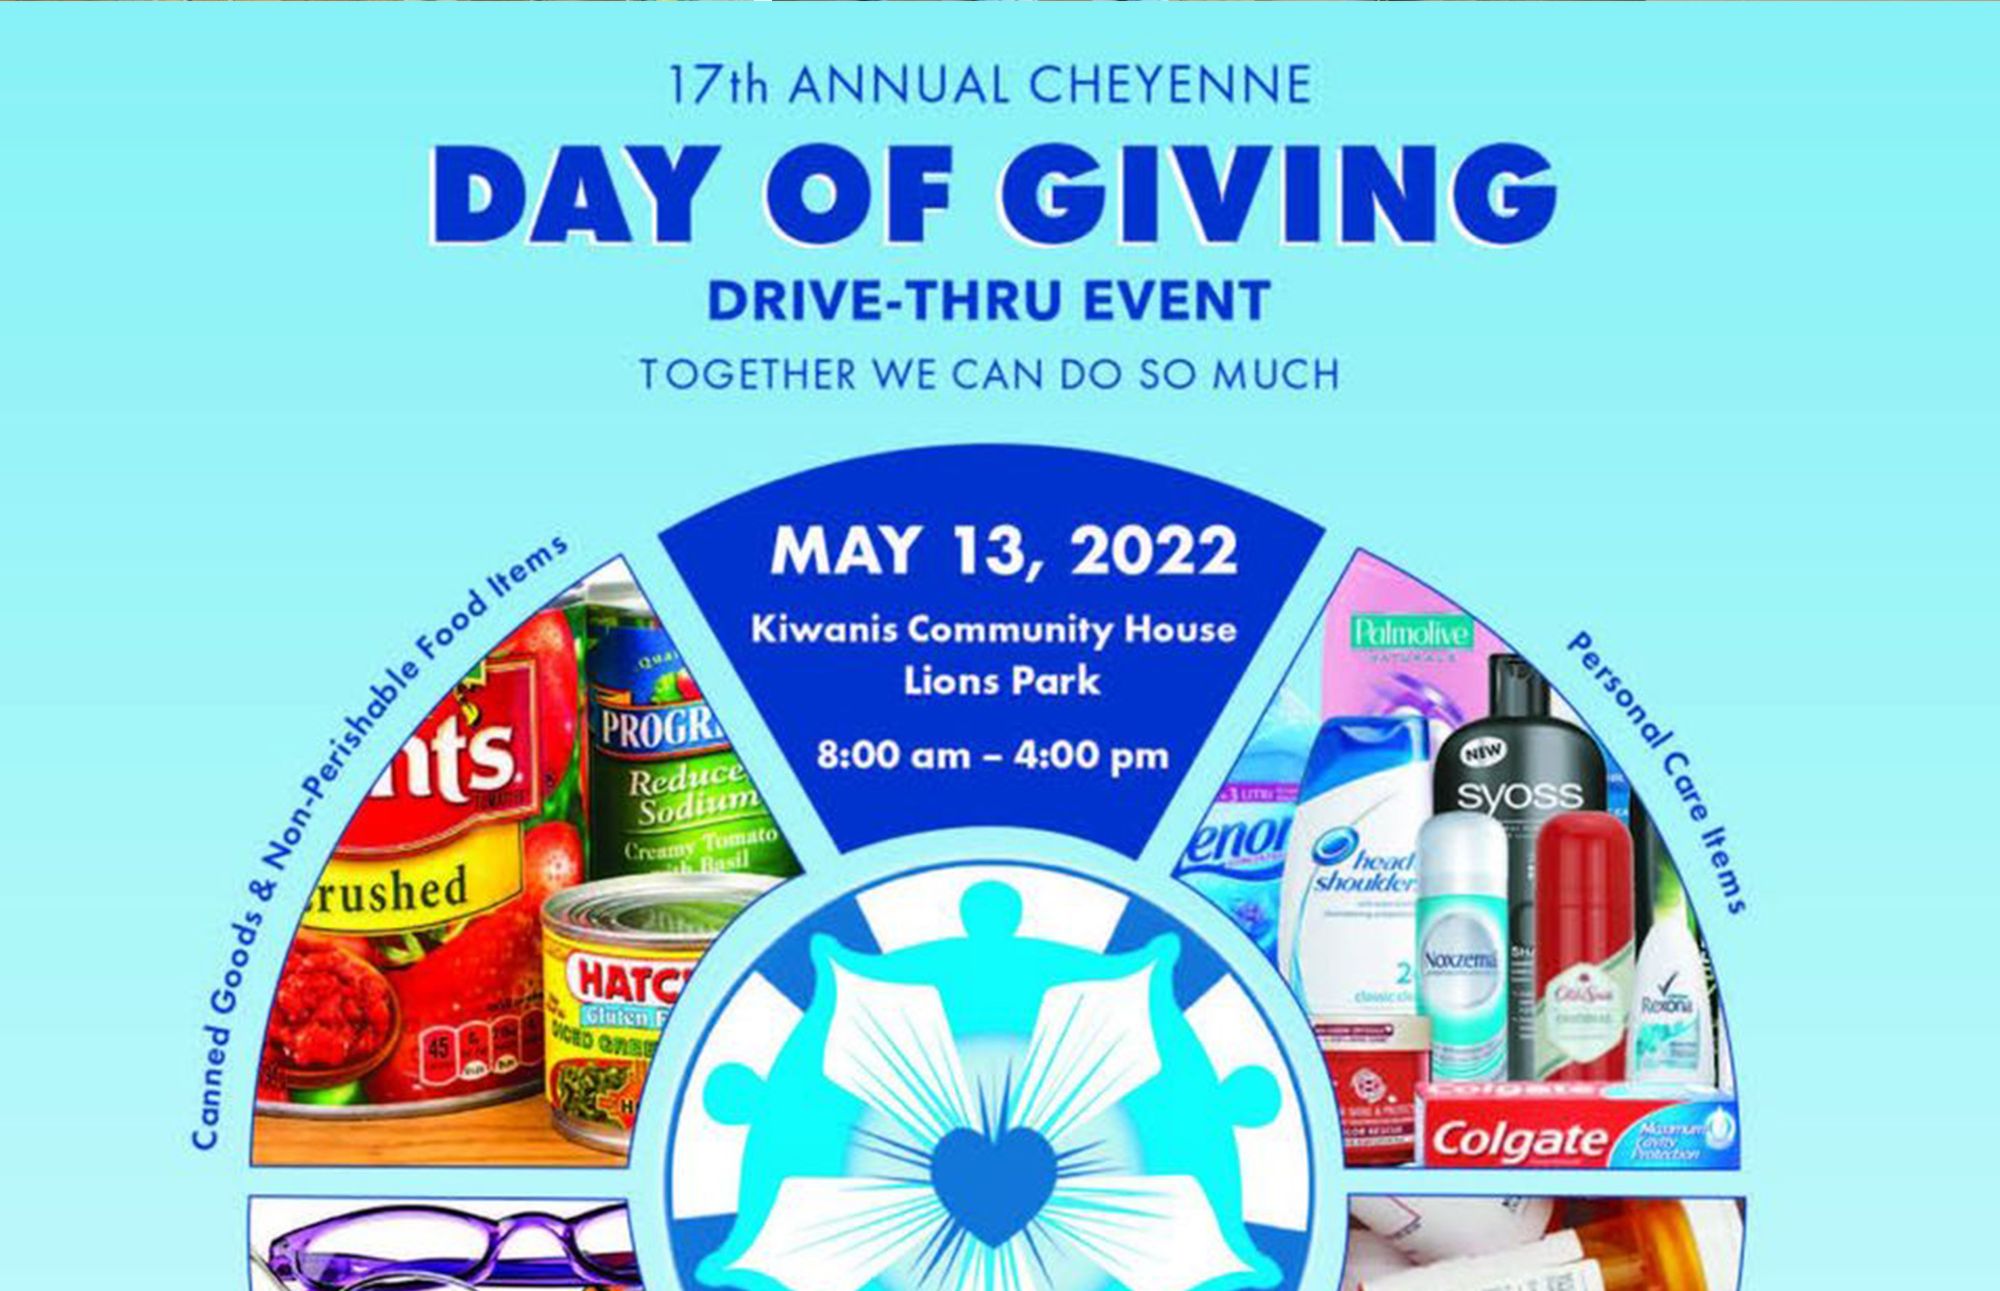 Don't Miss Cheyenne's Day Of Giving On May 13, 2022